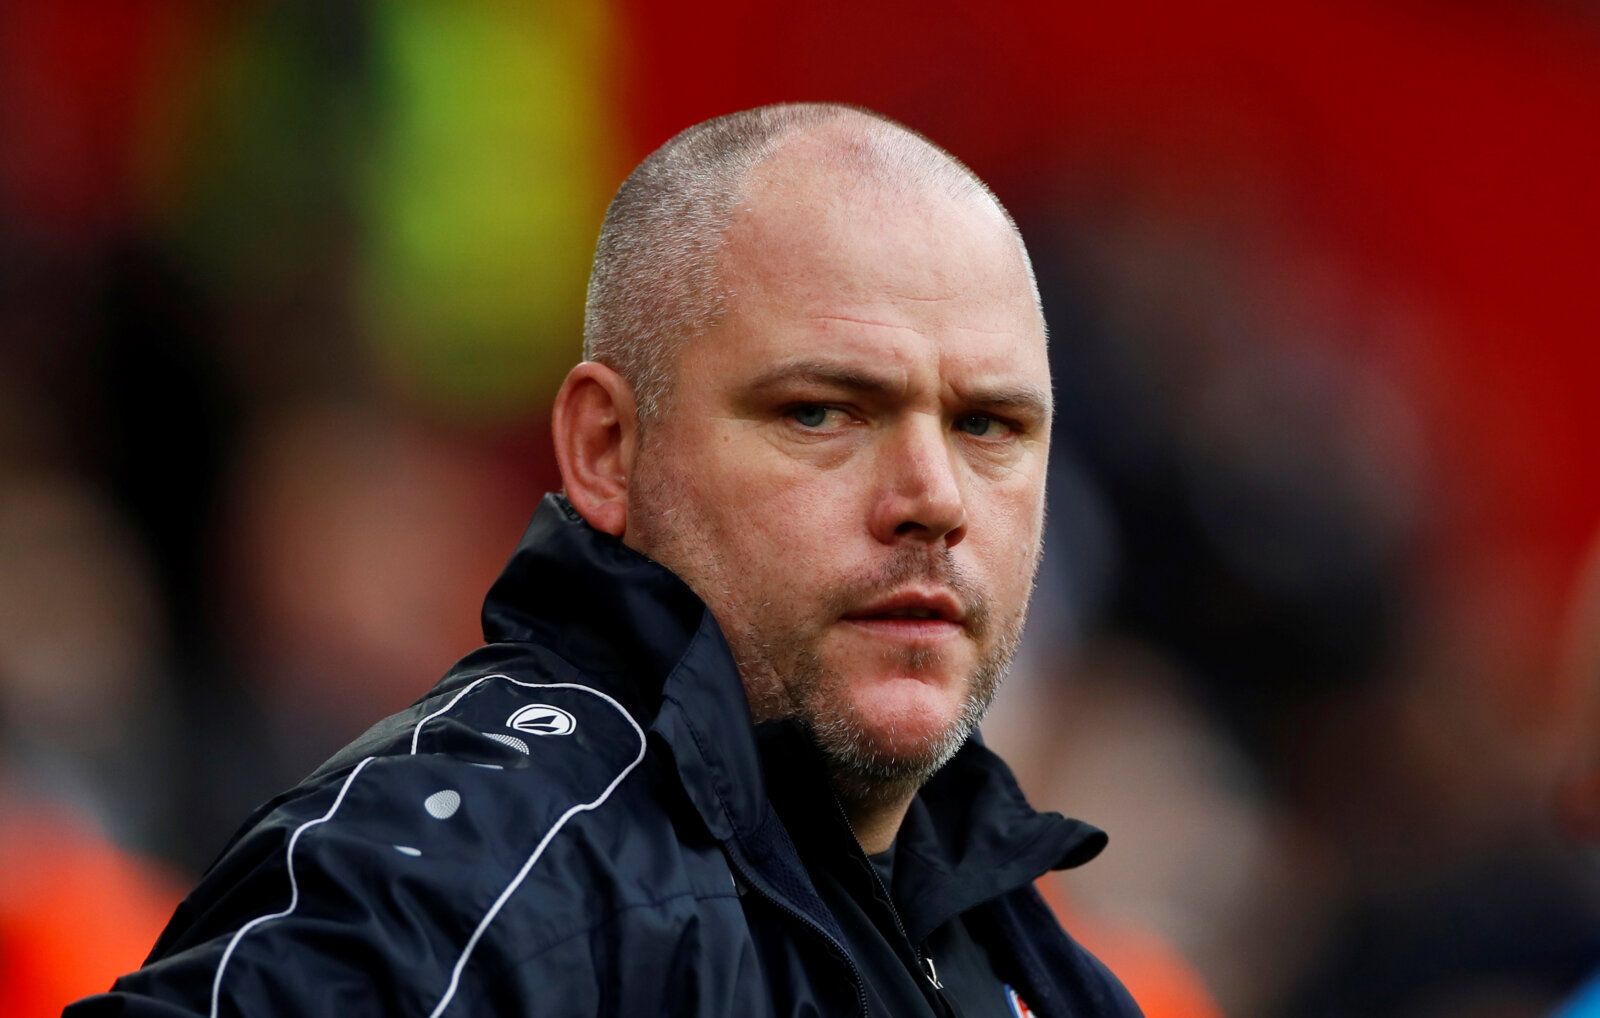 Soccer Football - FA Cup - Third Round - Sheffield United v AFC Fylde - Bramall Lane, Sheffield, Britain - January 5, 2020  AFC Fylde manager Jim Bentley before the match  Action Images via Reuters/Jason Cairnduff